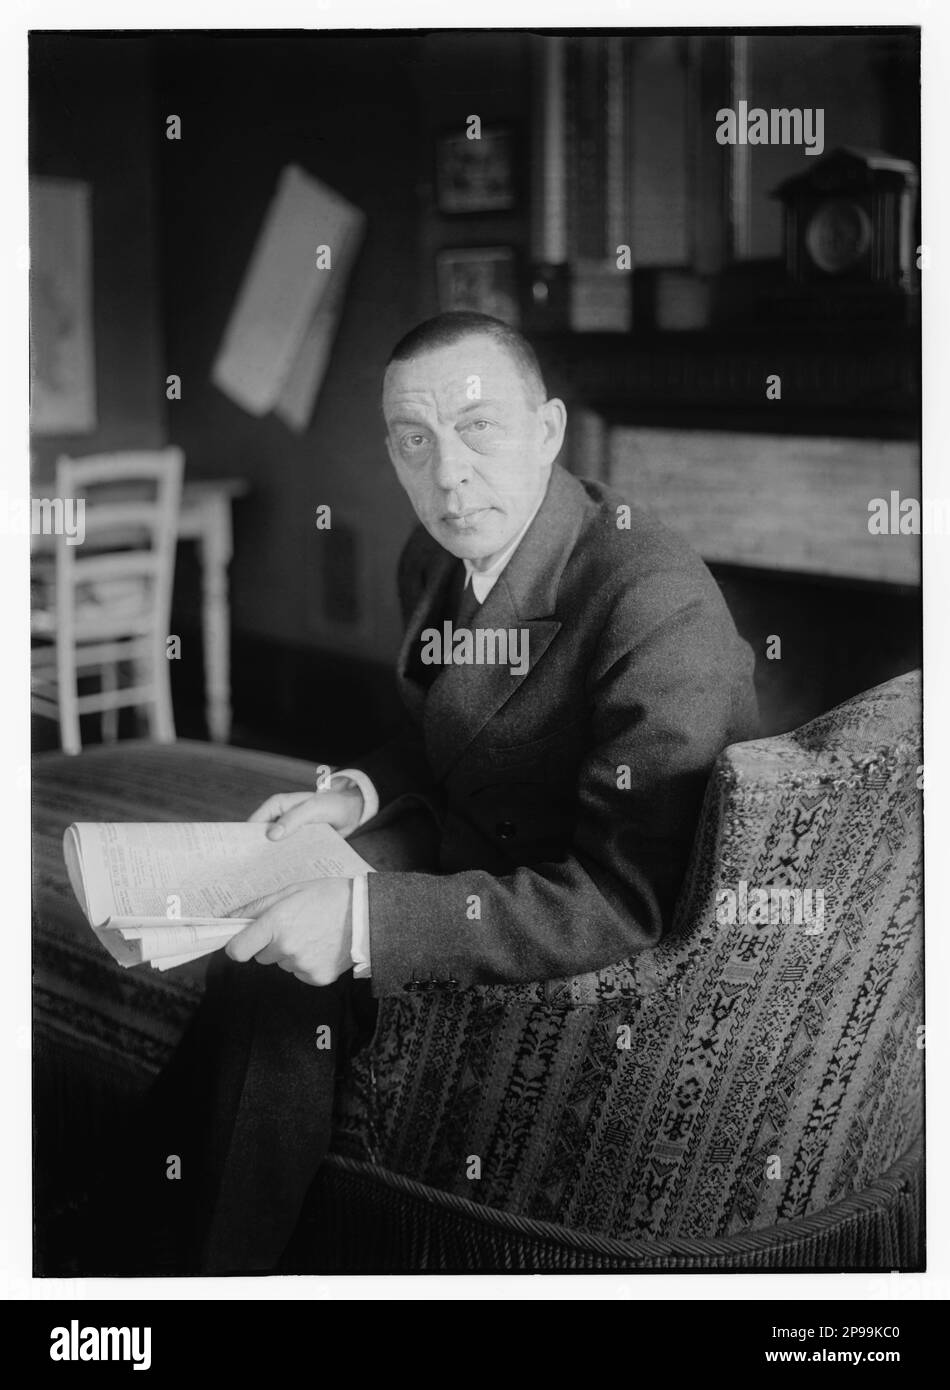 1920 , august , New York , USA : The russian music composer  and pianist SERGEI RACHMANINOFF ( Sergej Vasil'evic Rahmaninov - Sergej Vasilyevich Rachmaninov ) (Velikij Novgorod, Russia 1873 – Beverly Hills, USA 1943 ) . He had great success with the Opera ALEKO , four piano concertos and many others works . He was one of the greatest pianist of his time . Photograph by Bain , New York - PIANISTA - COMPOSITORE - OPERA LIRICA - CLASSICA - CLASSICAL - PORTRAIT - RITRATTO - MUSICISTA - MUSICA   - CRAVATTA - TIE - -- ARCHIVIO GBB Stock Photo